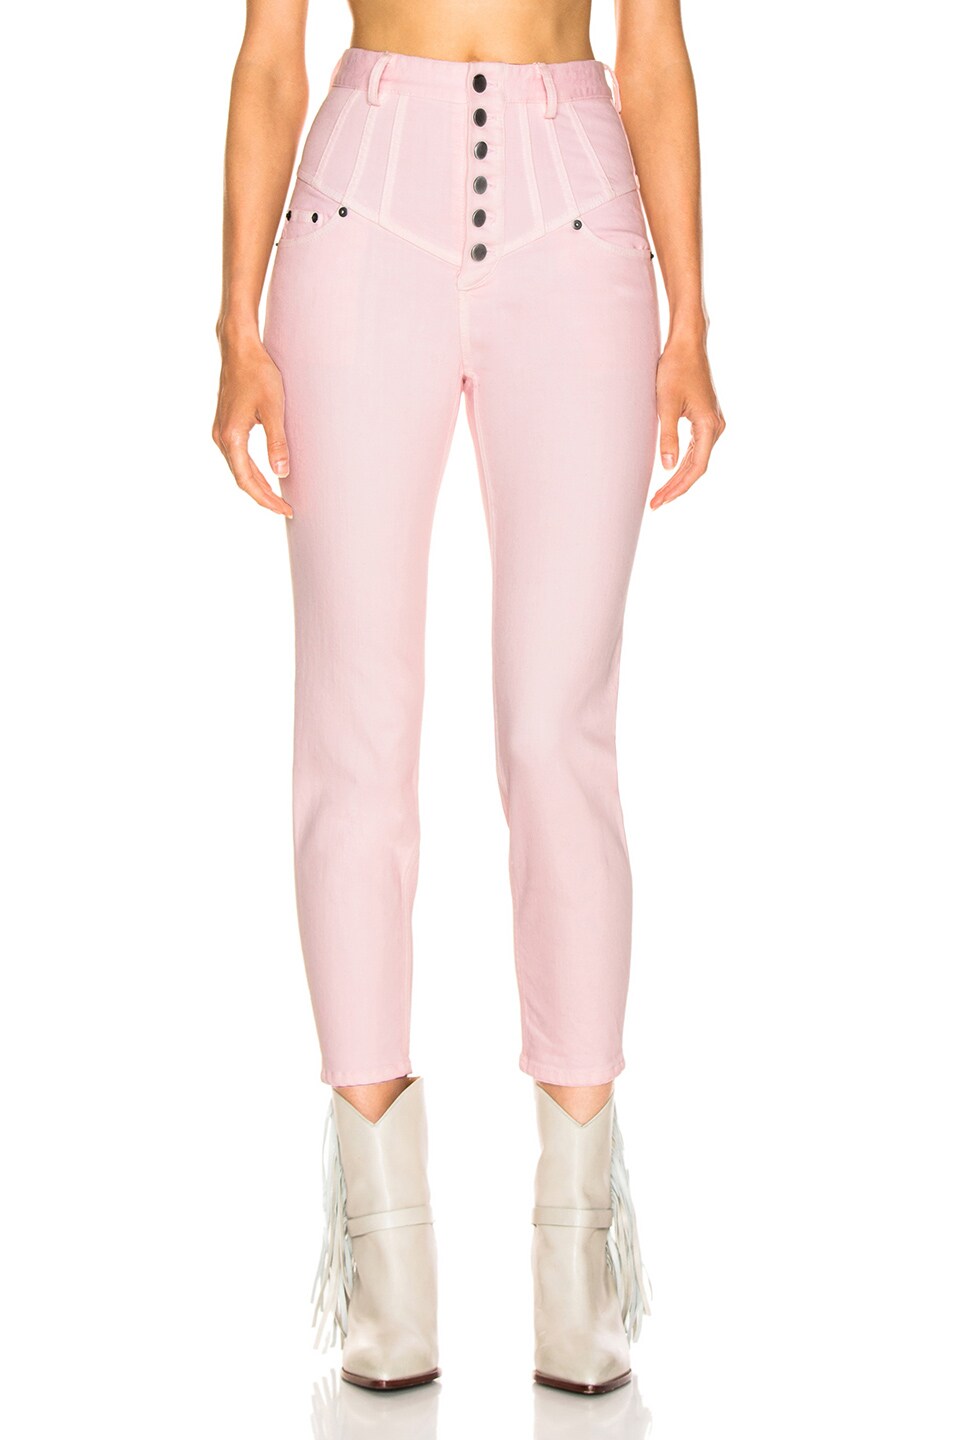 Image 1 of Marissa Webb Hartly Pants in Washed Pink